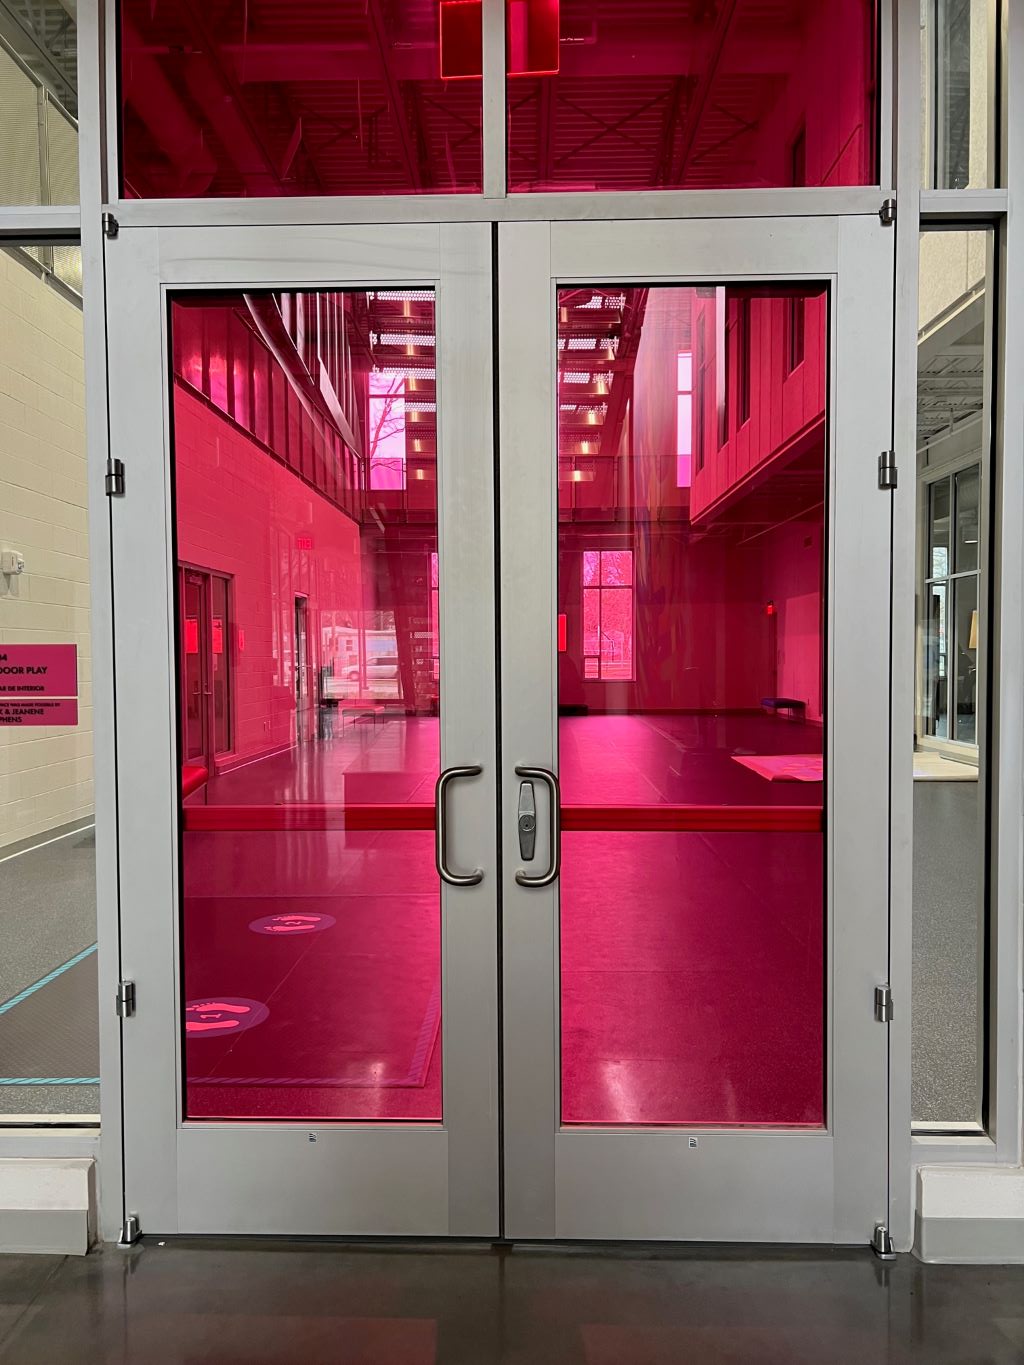 Double glass doors with the glass tinted bright pink, looking into a large open room.